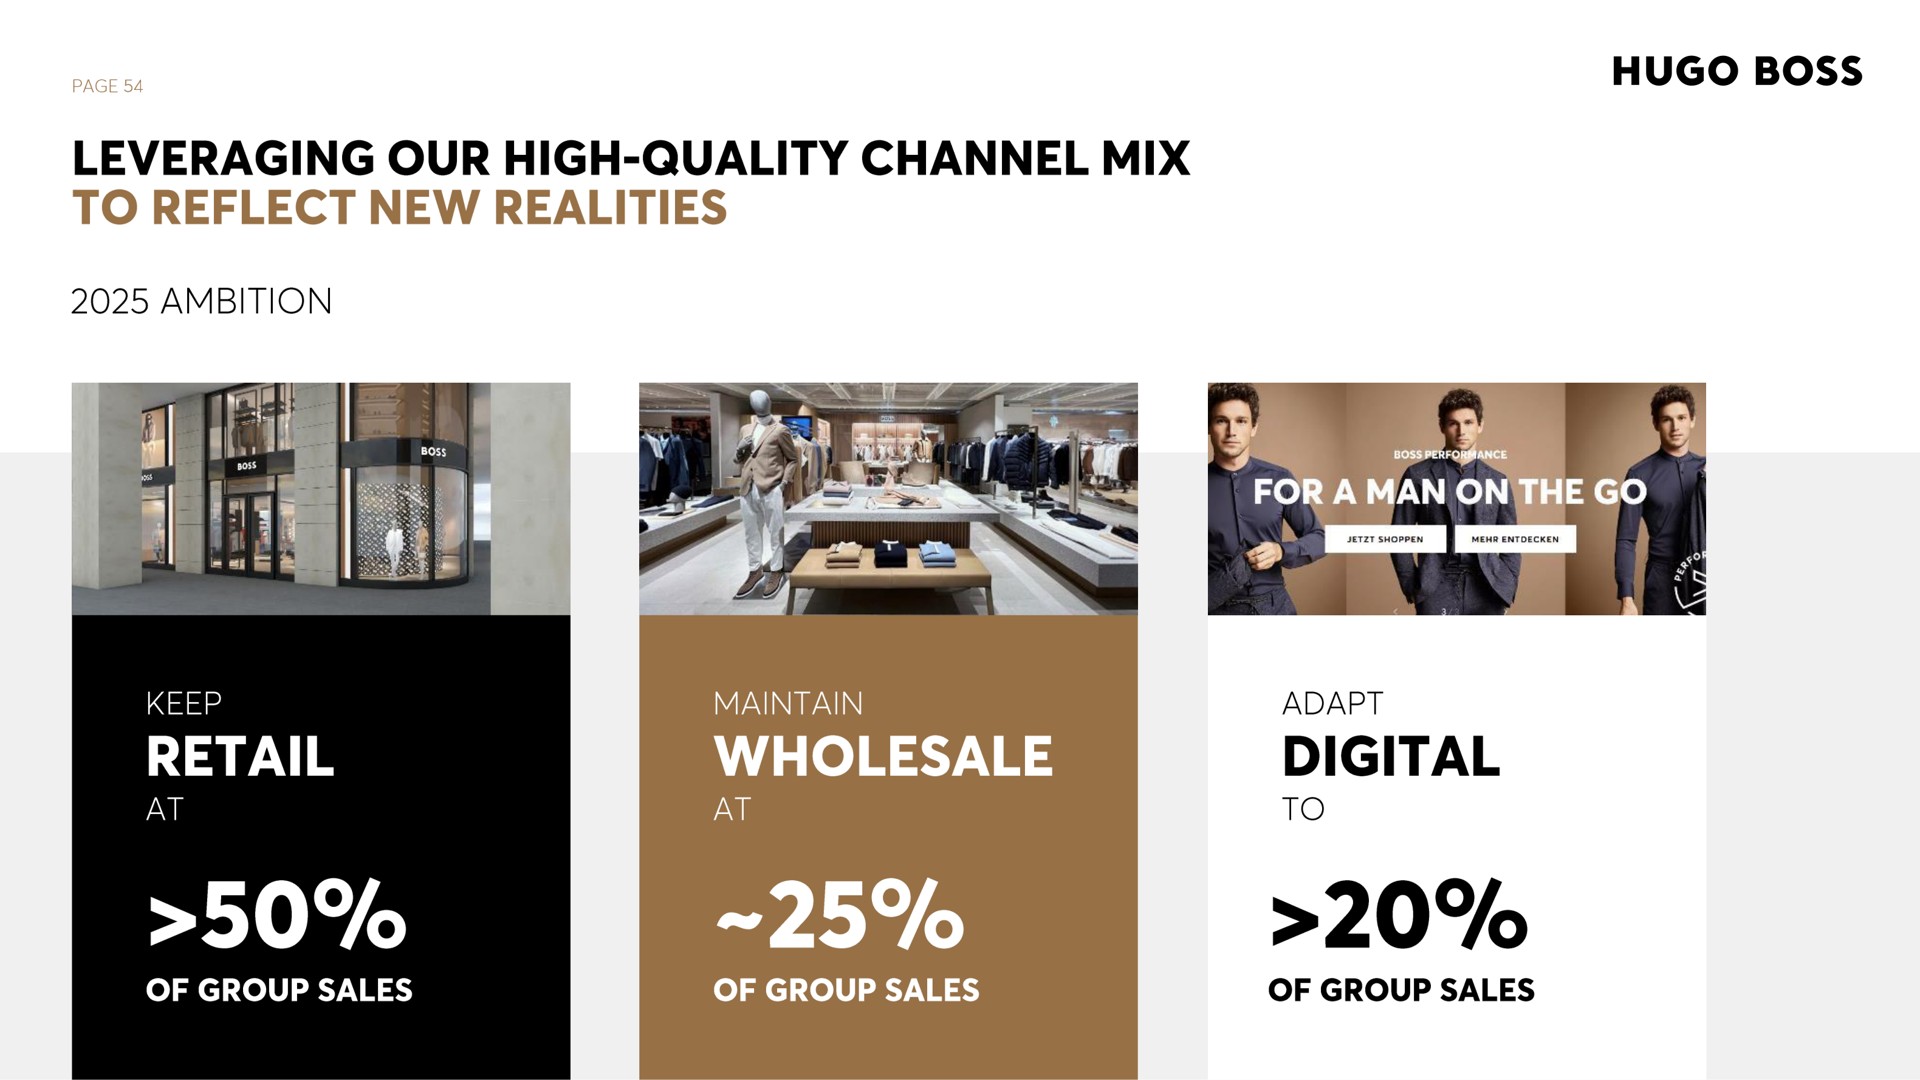 leveraging our high quality channel mix to reflect new realities ambition boss maintain wholesale of group sales of group sales adapt digital to of group sales | Hugo Boss